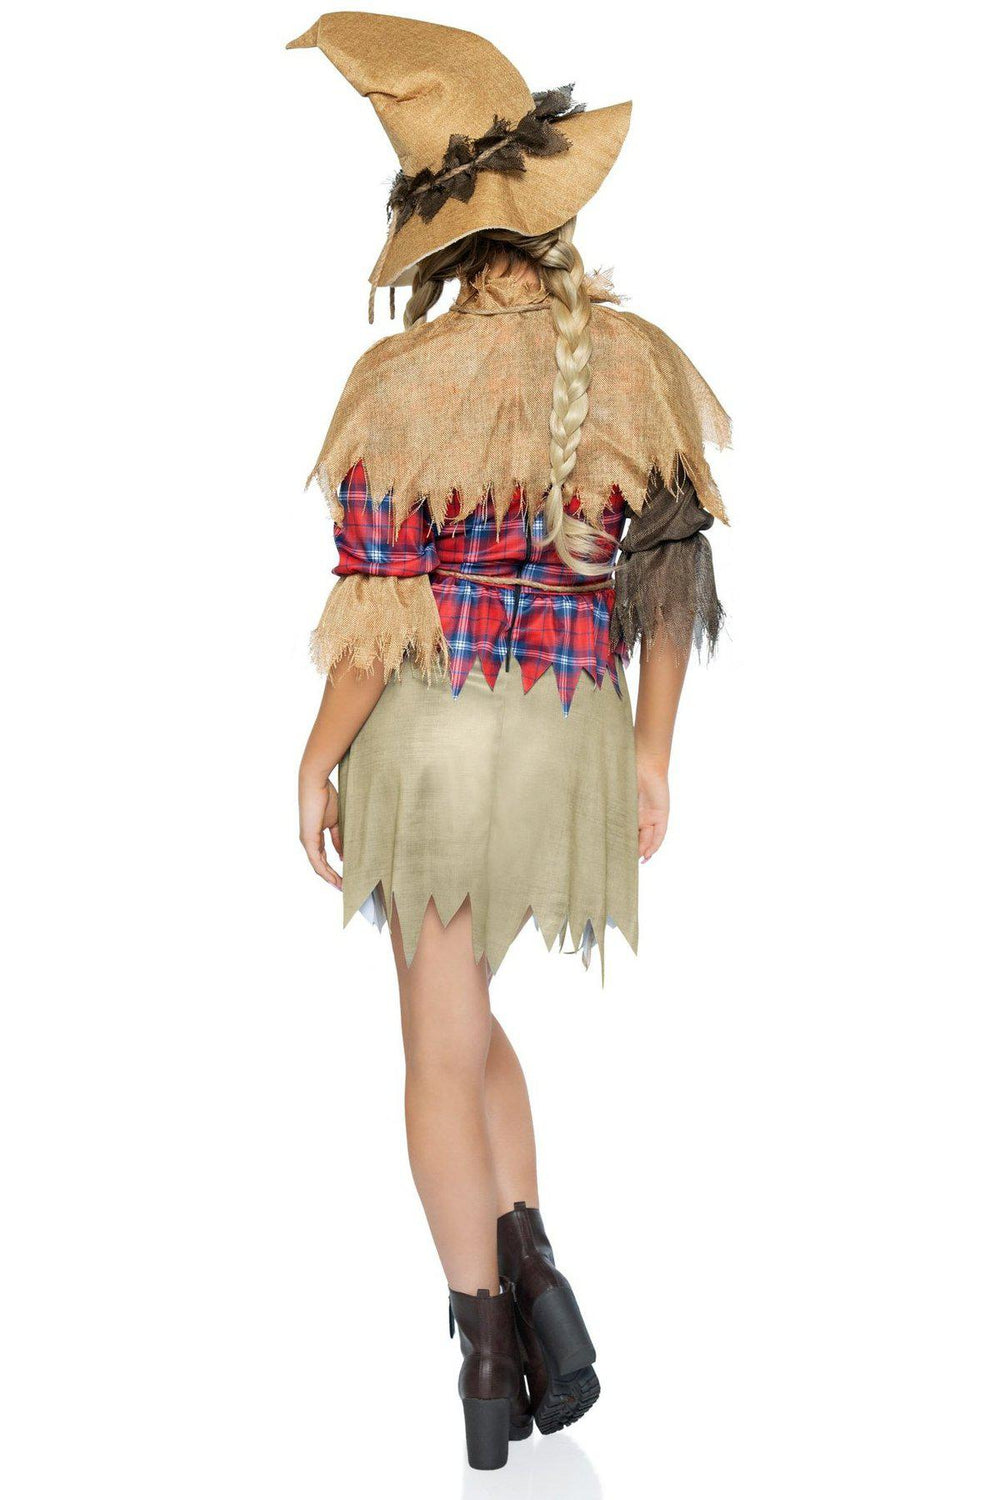 Sinister Scarecrow Costume-Other Costumes-Leg Avenue-SEXYSHOES.COM